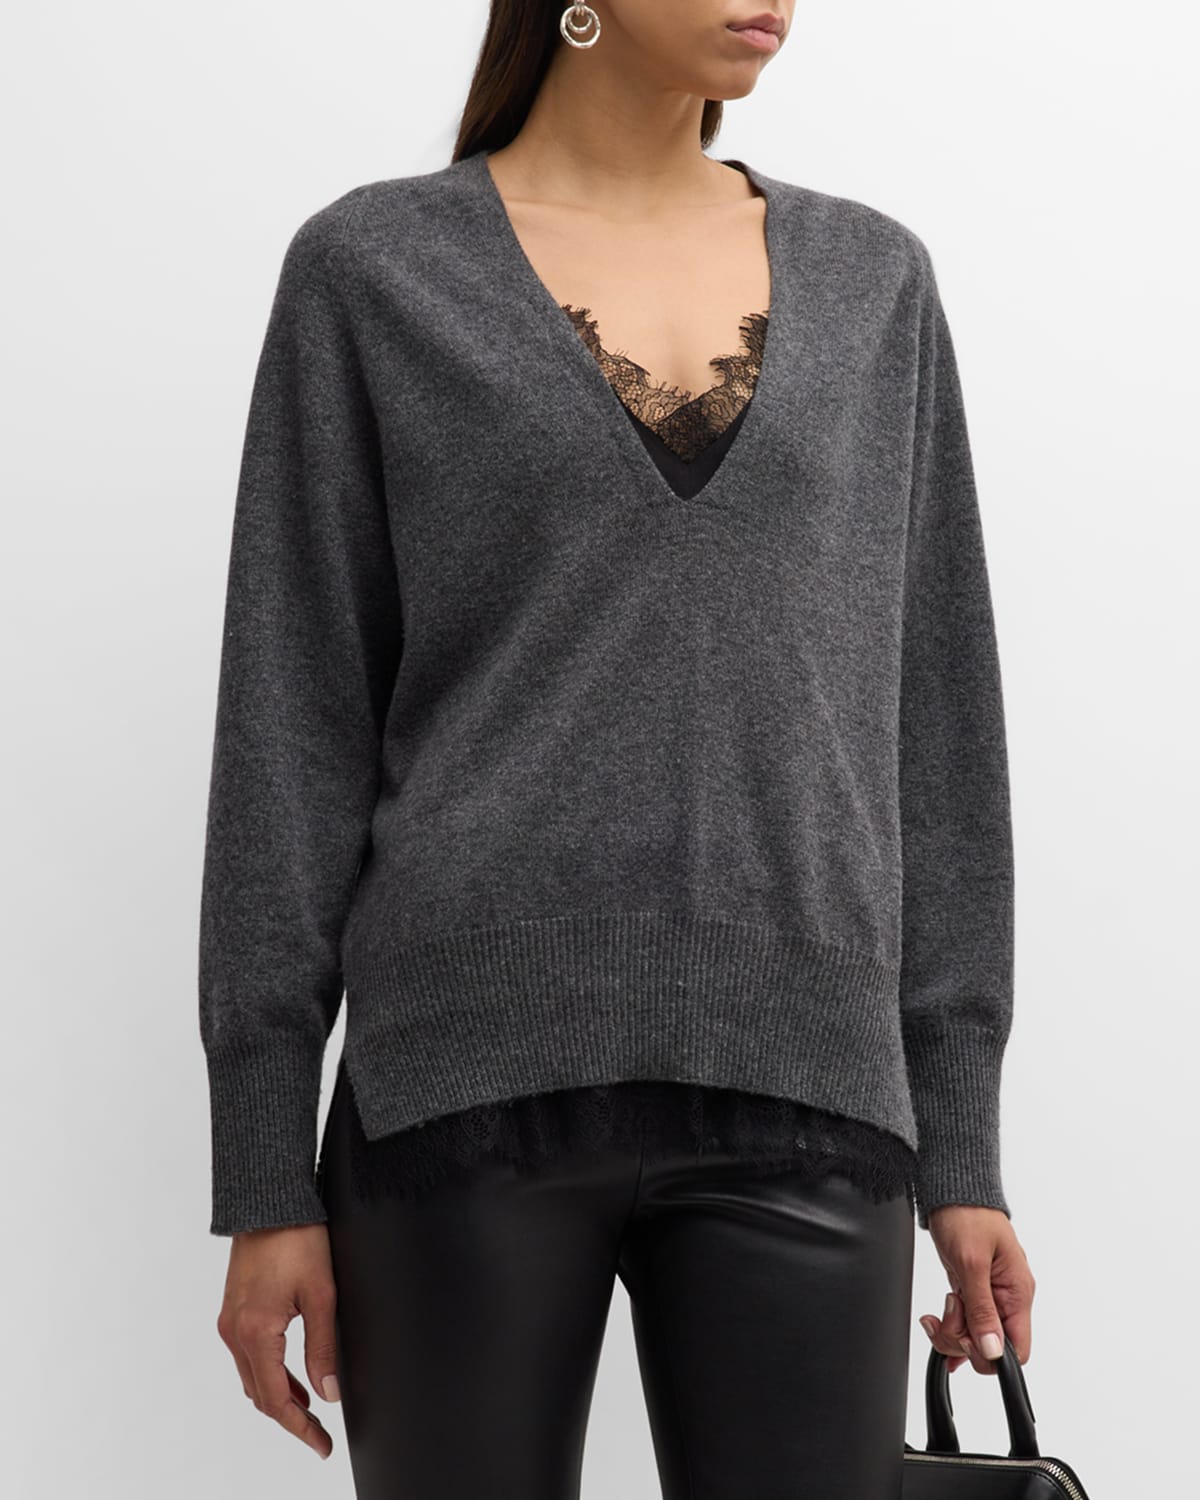 Lace-Trim Layered Pullover